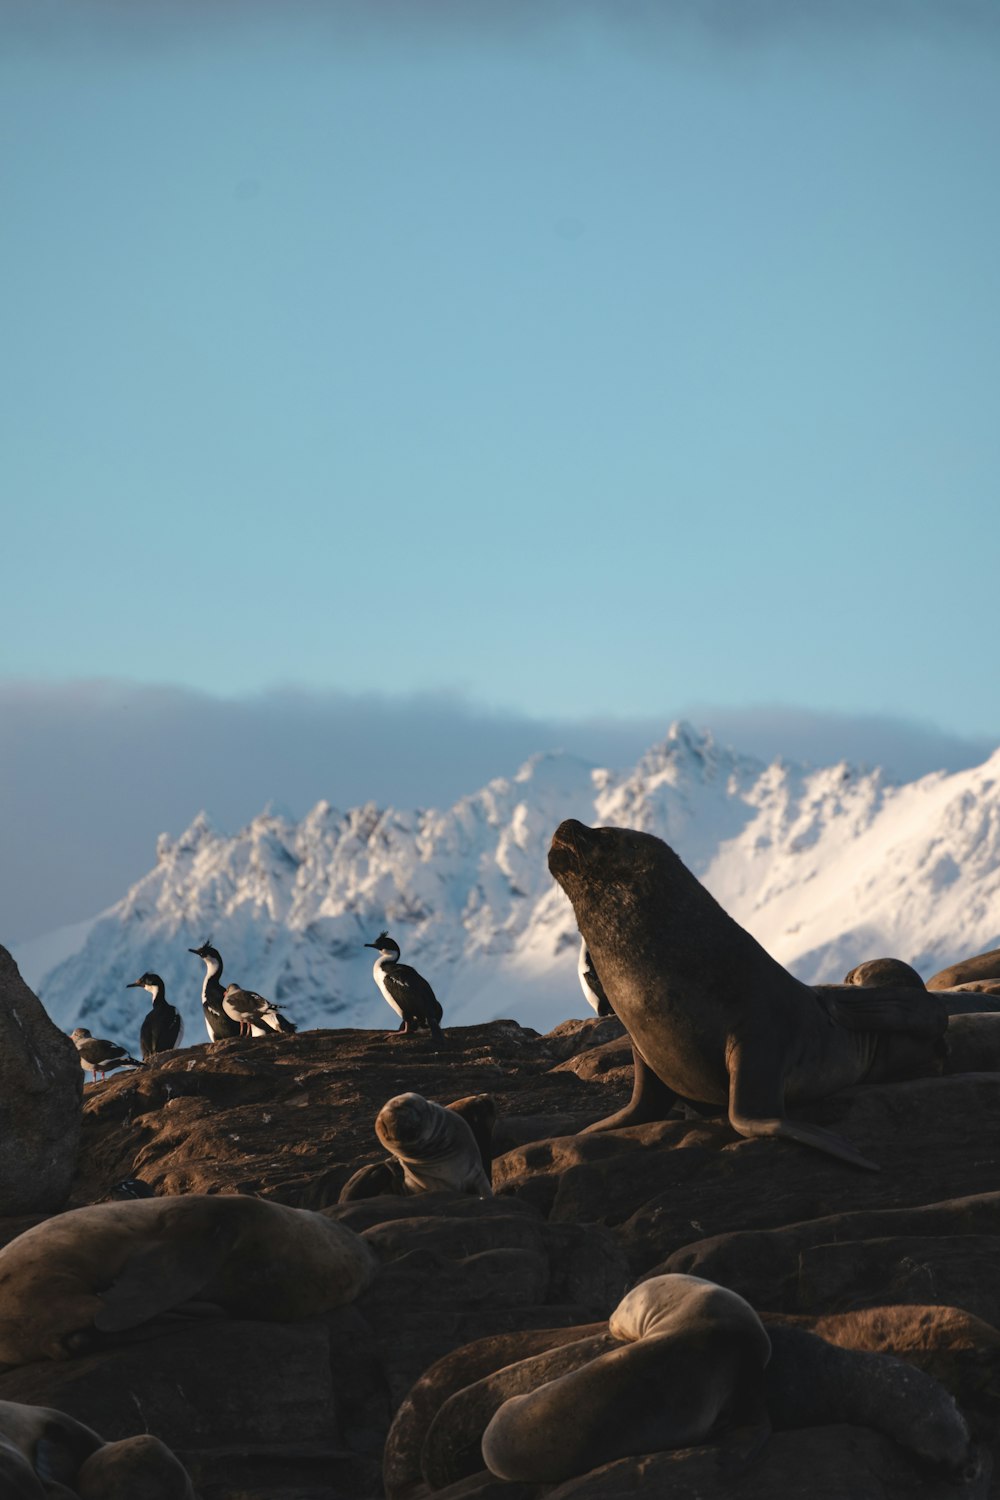 a seal and seagulls on a rocky beach with mountains in the background